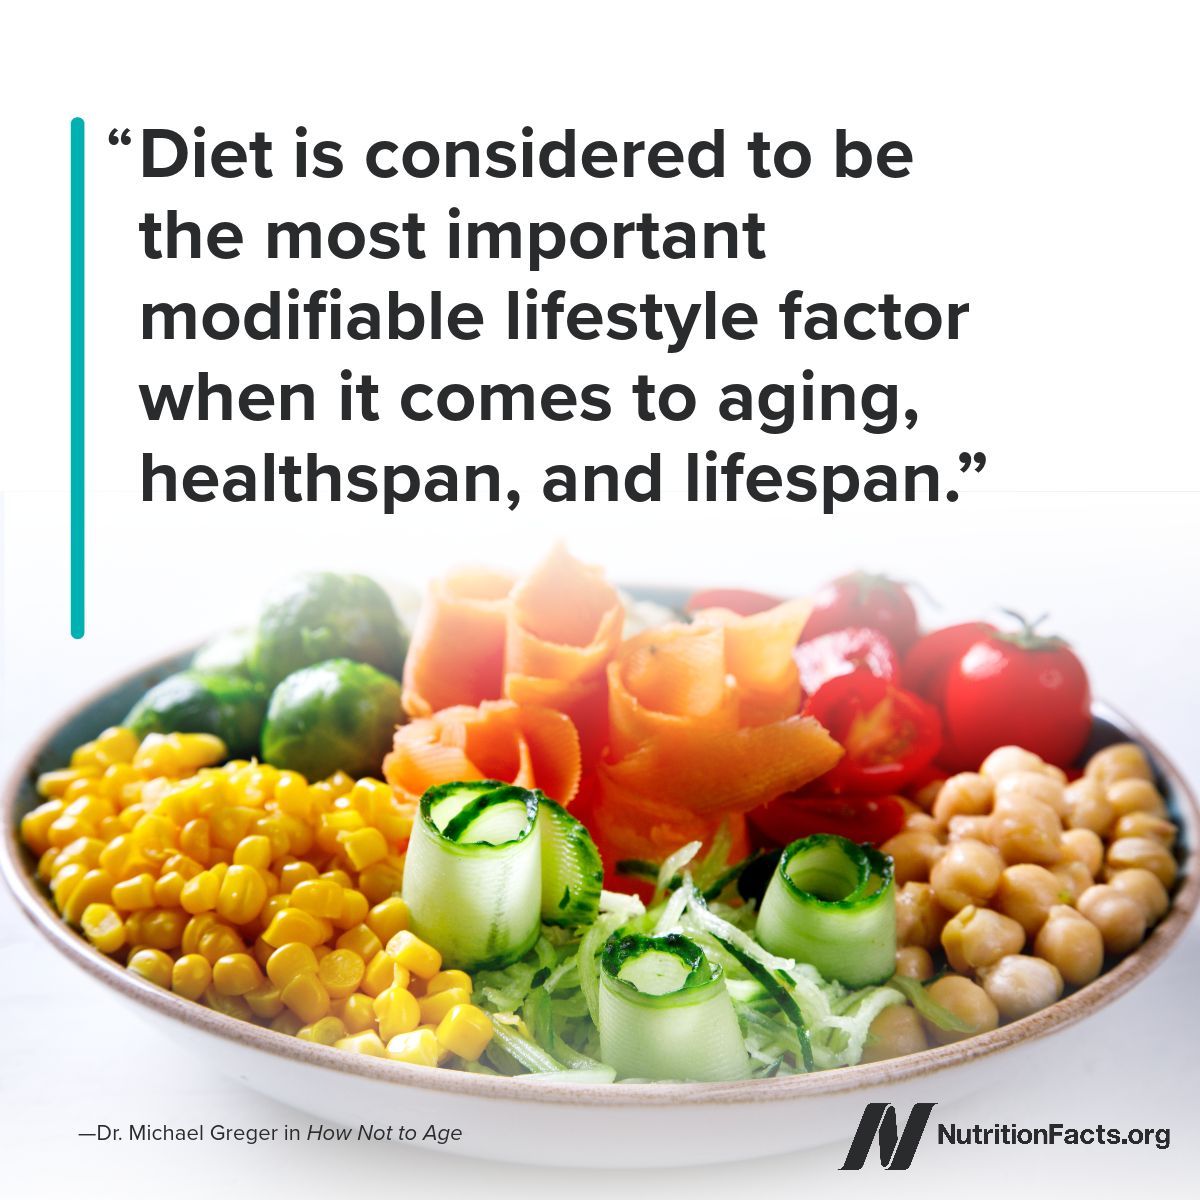 Subscribe to our free newsletter and receive a handbook on the Anti-Aging Eight, the specific foods or actions that may best help to slow aging or improve longevity, from Dr. Greger’s new book, How Not to Age. buff.ly/2HSLILW